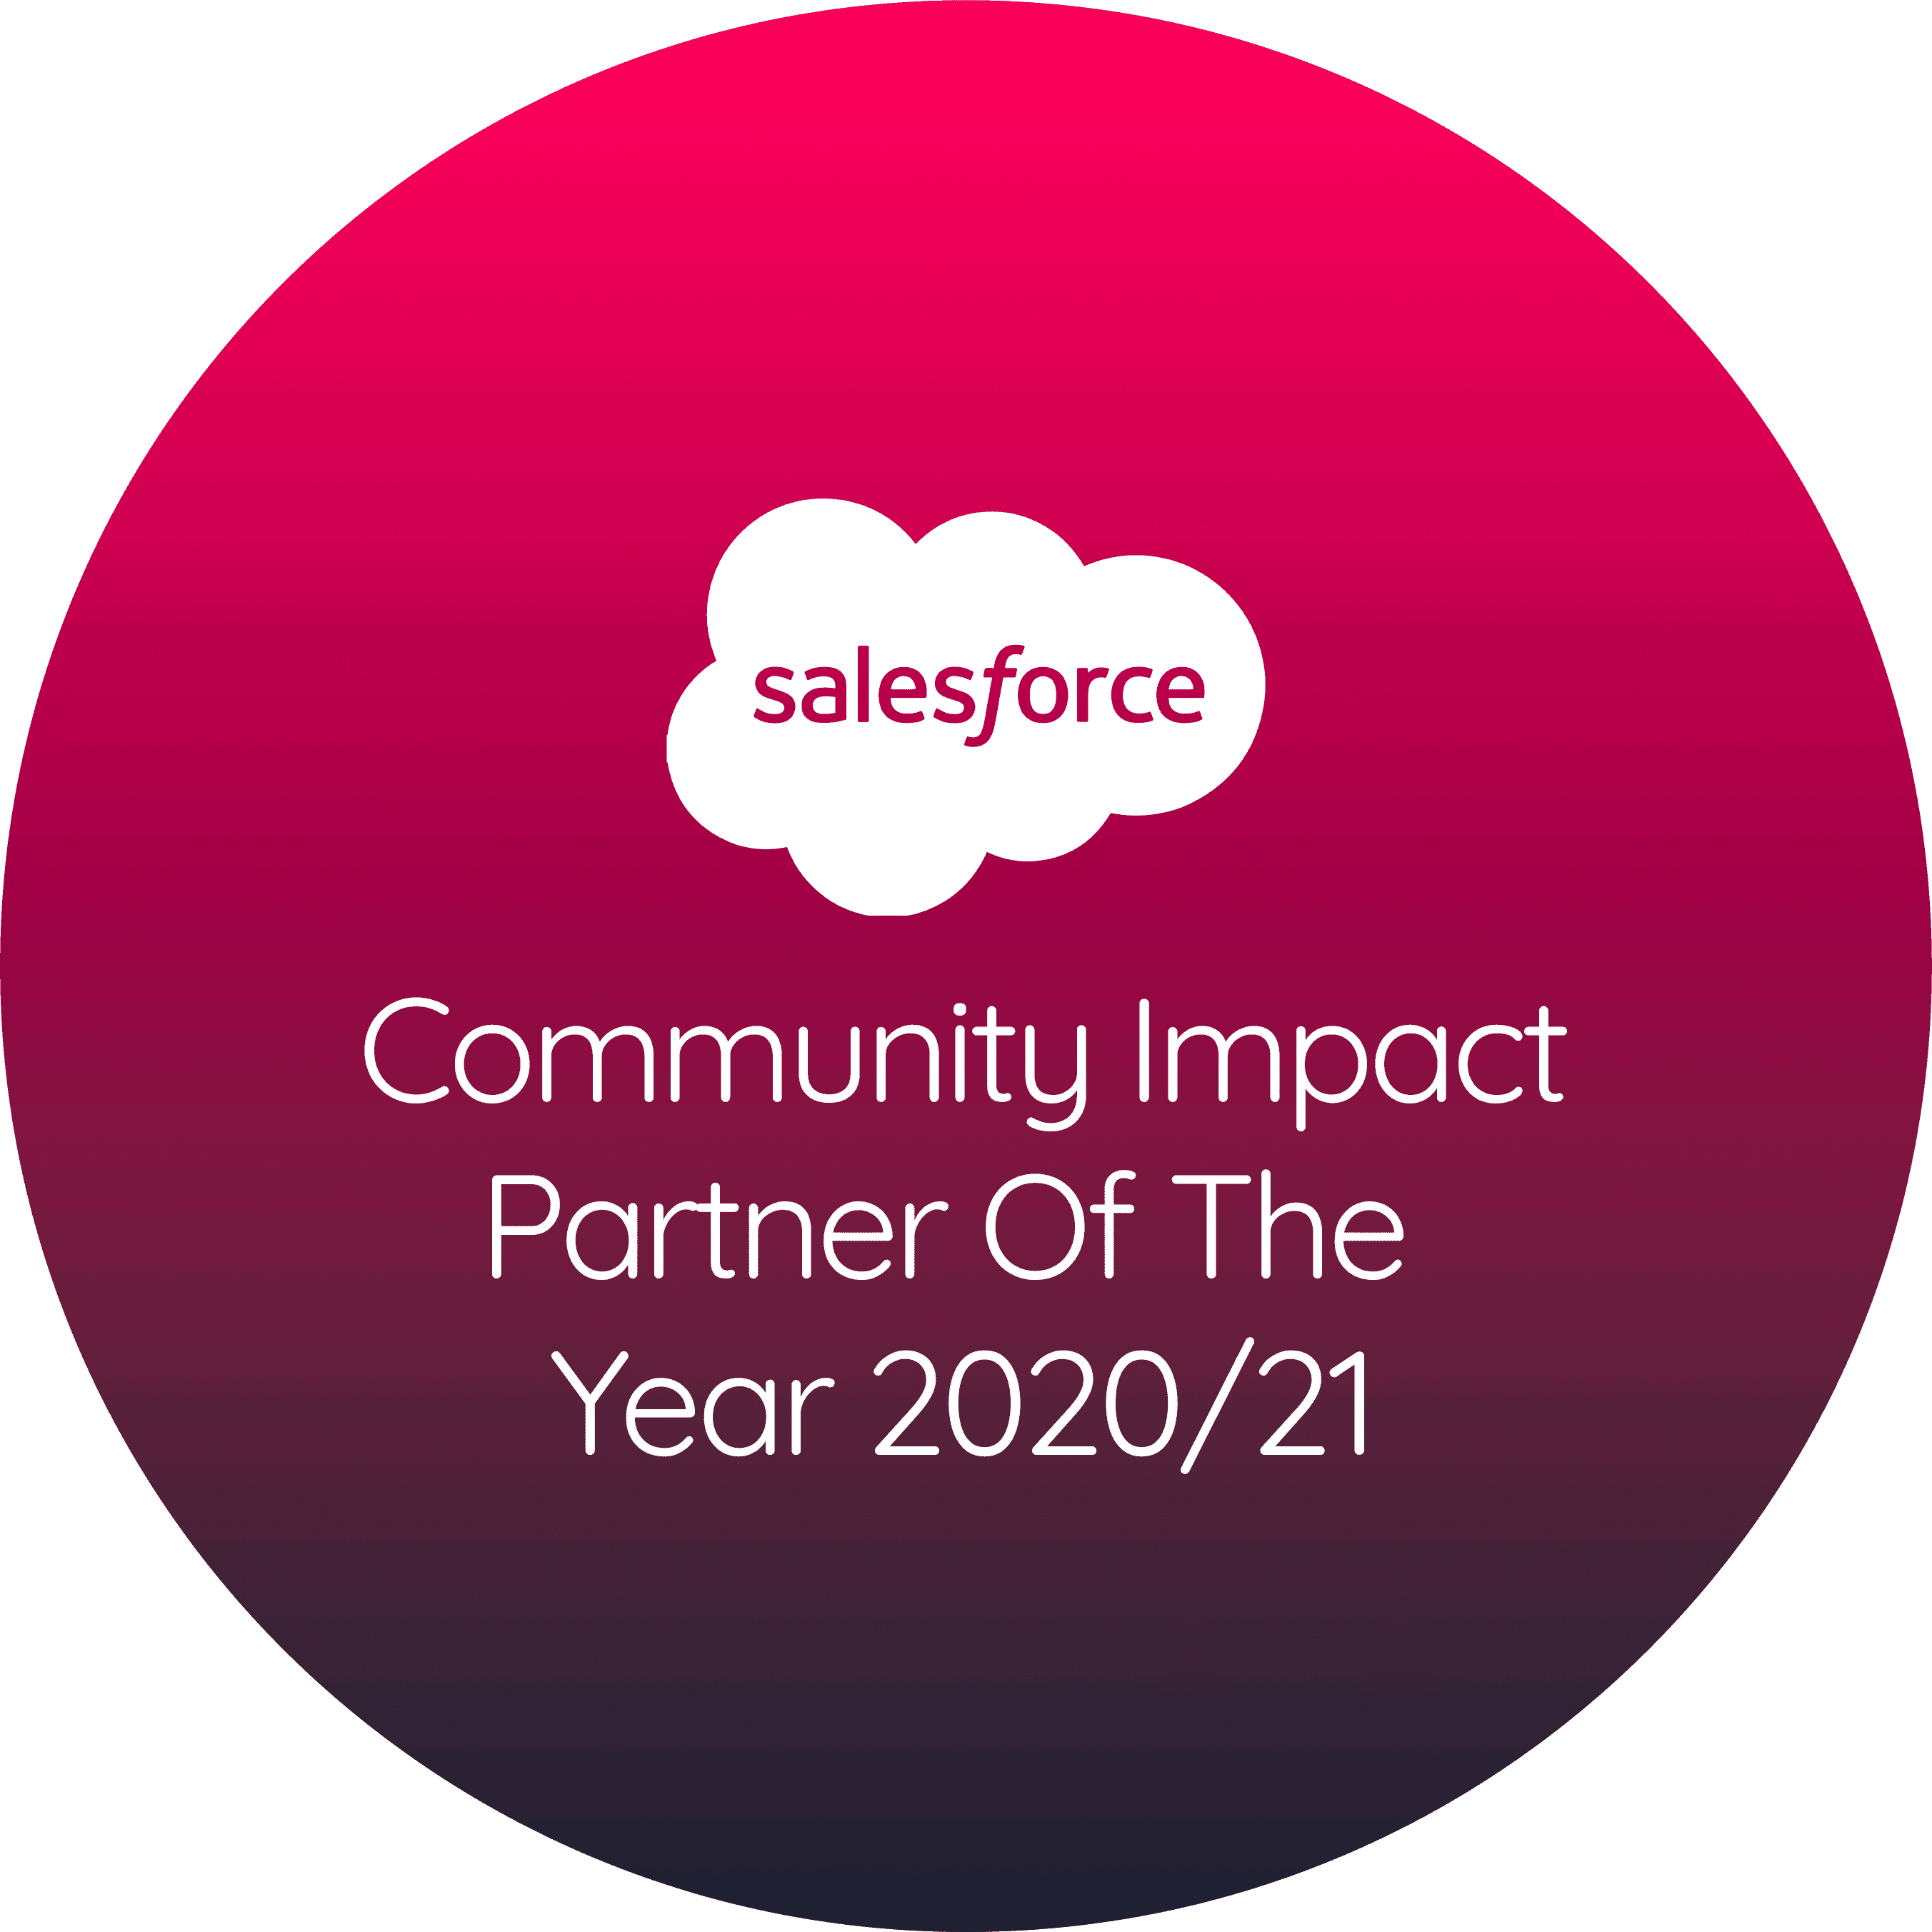 Salesforce community impact partner of the year 2020/21 specializing in Salesforce implementation and Financial management software integration.